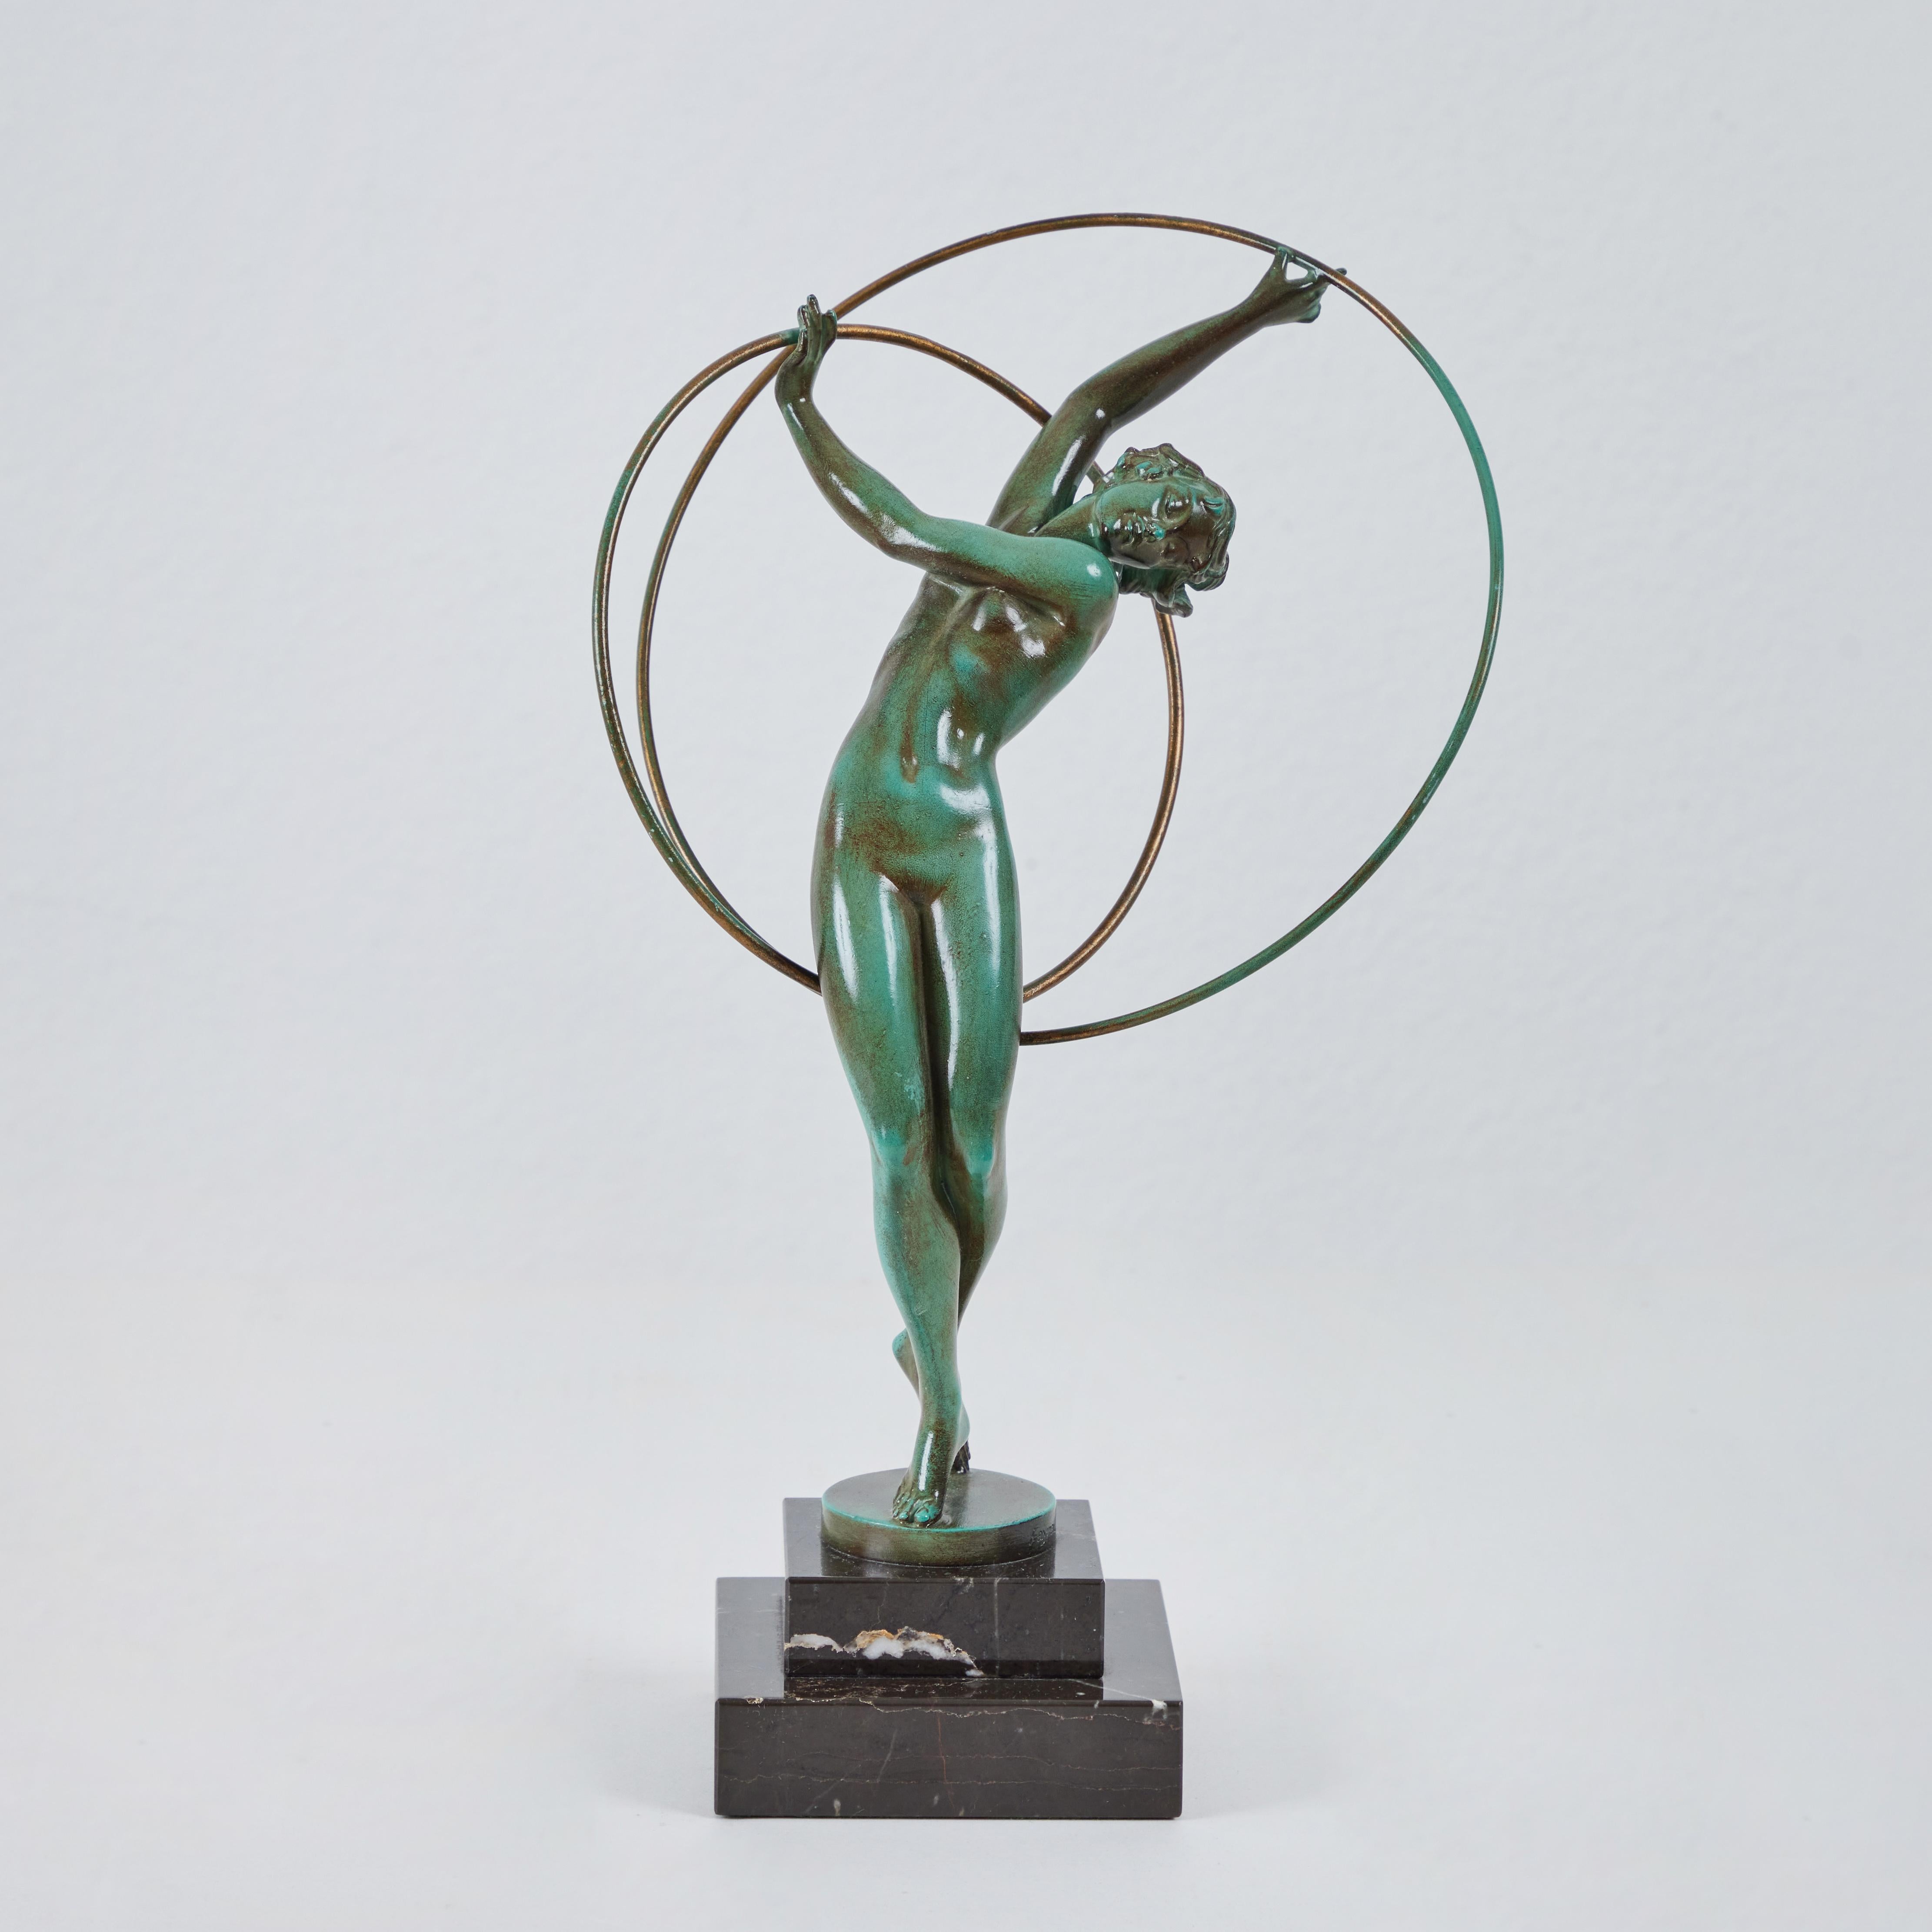 This hoop dancer sculpture by Pierre Le Faguay, signed his pseudonym 